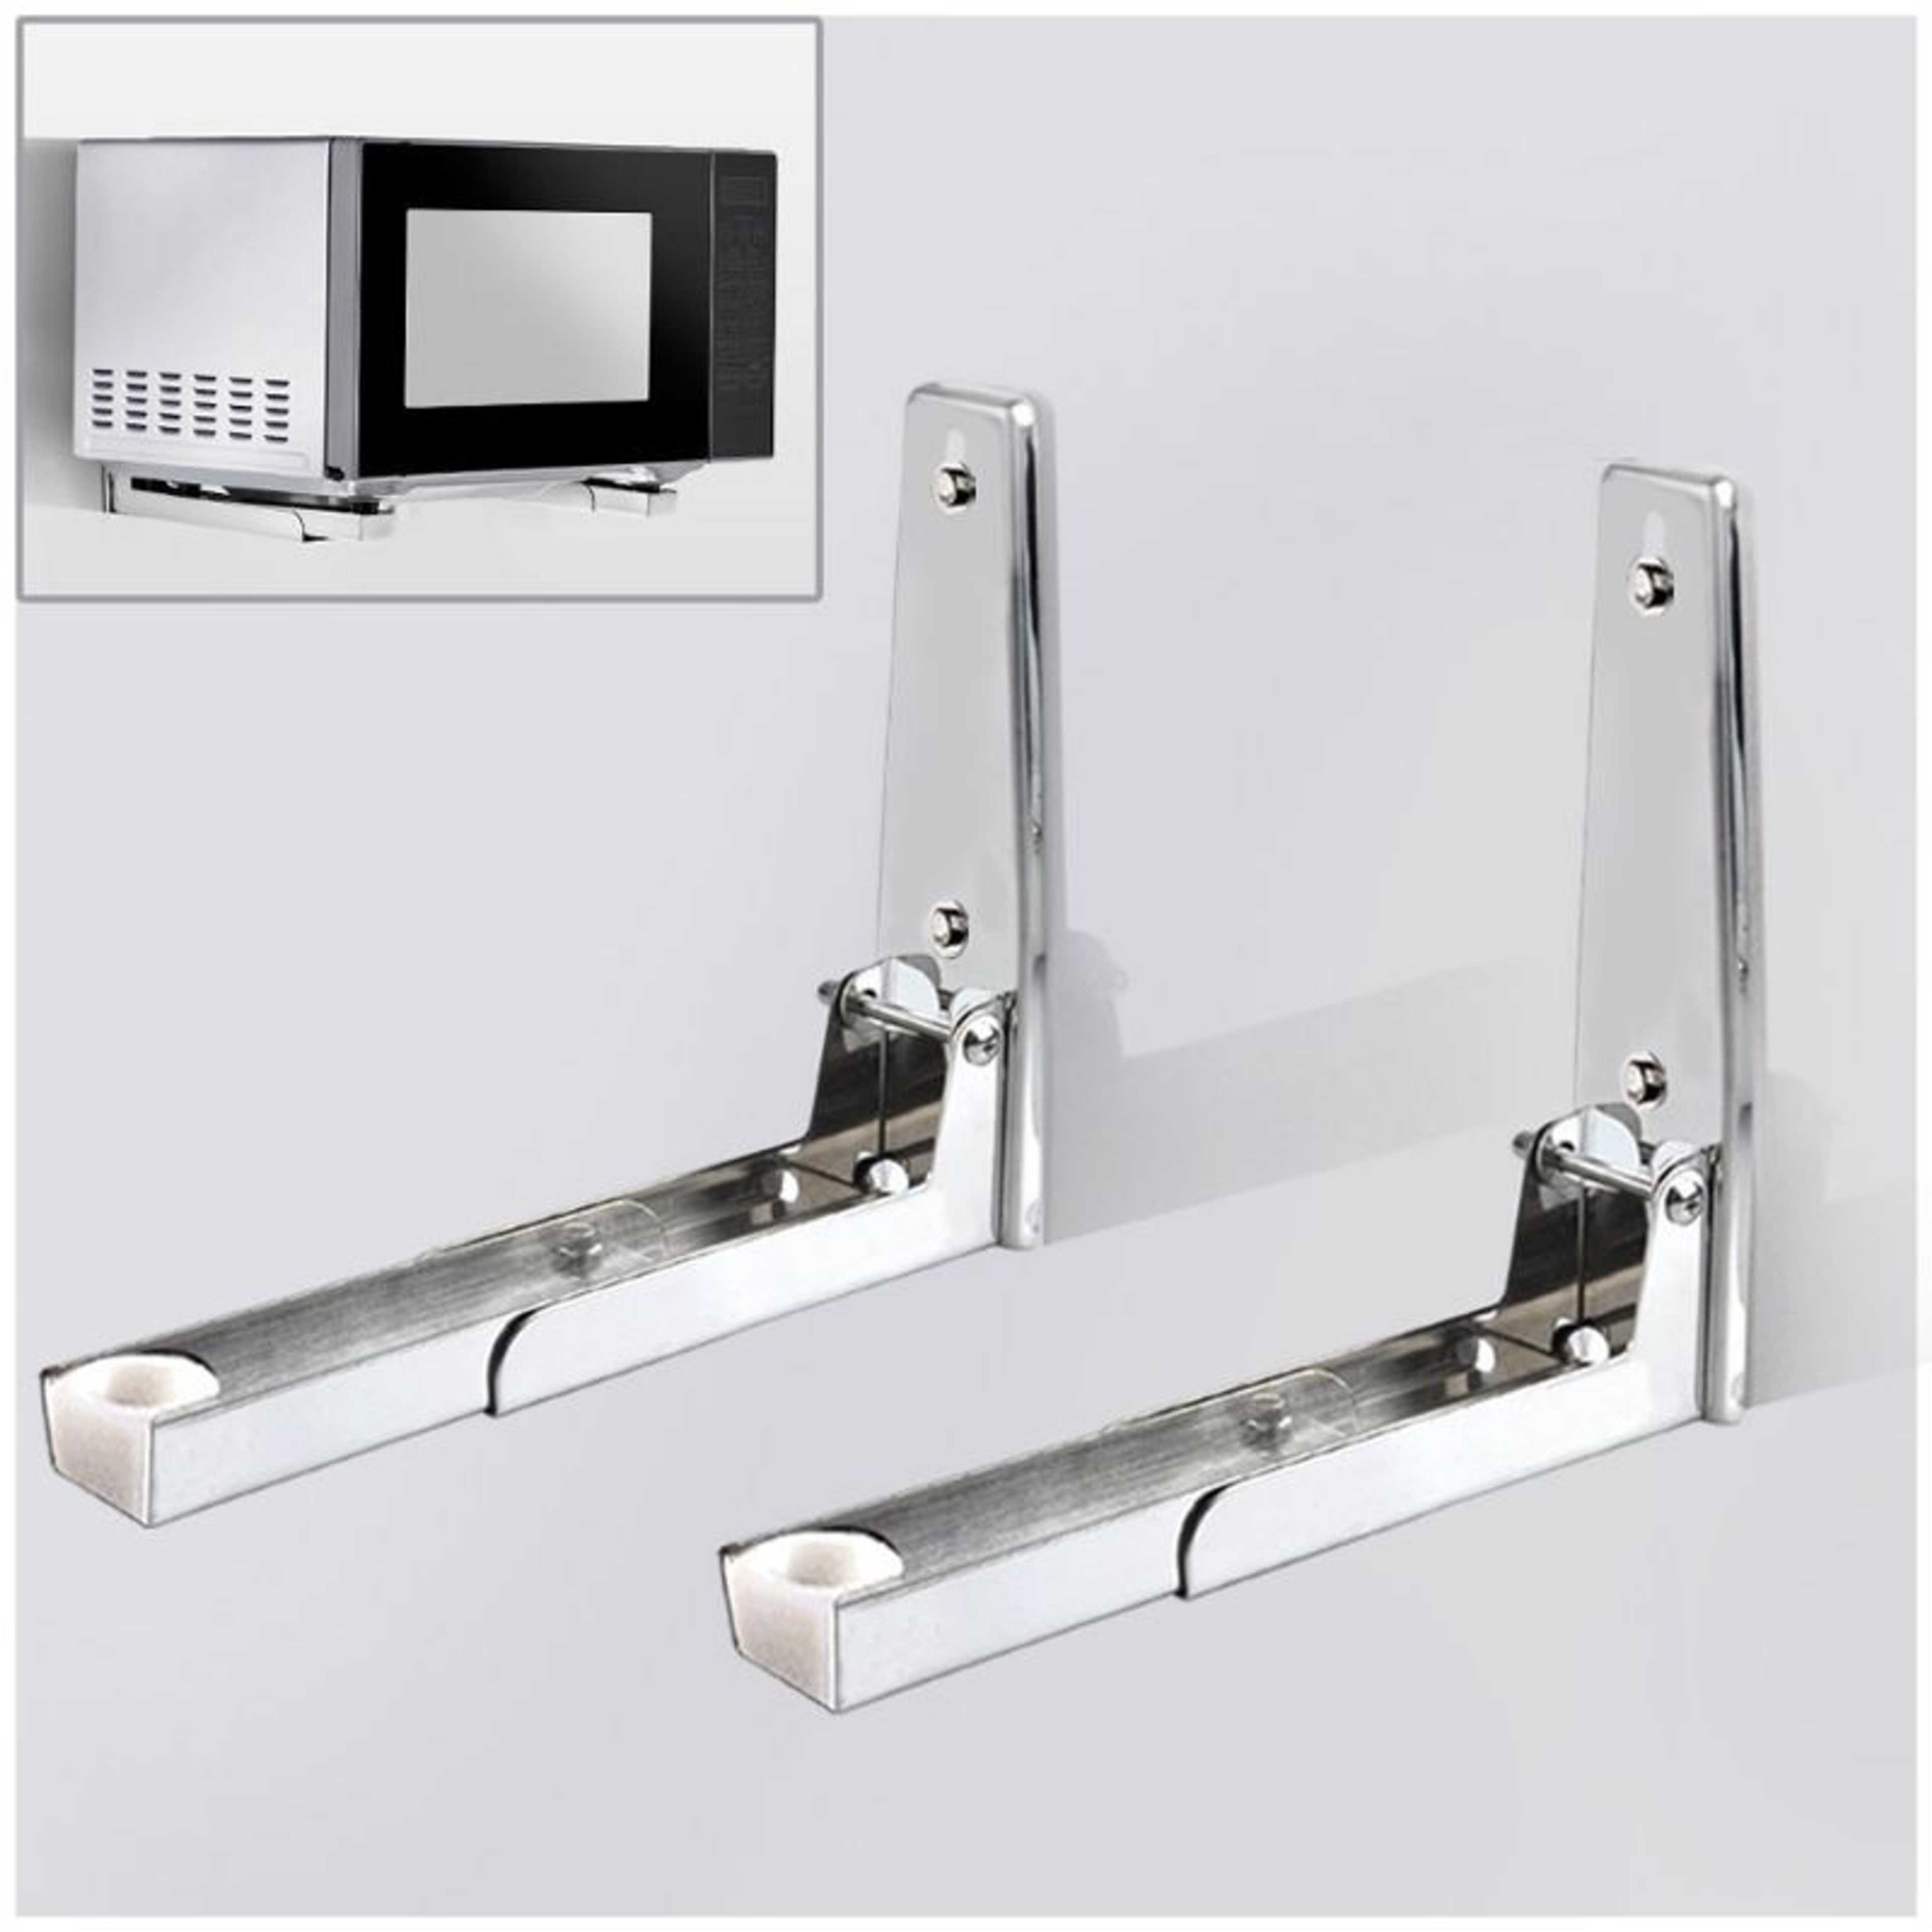 Wall Mounted Universal Oven, Stabilizers, UPS, Batteries, Microwave Bracket